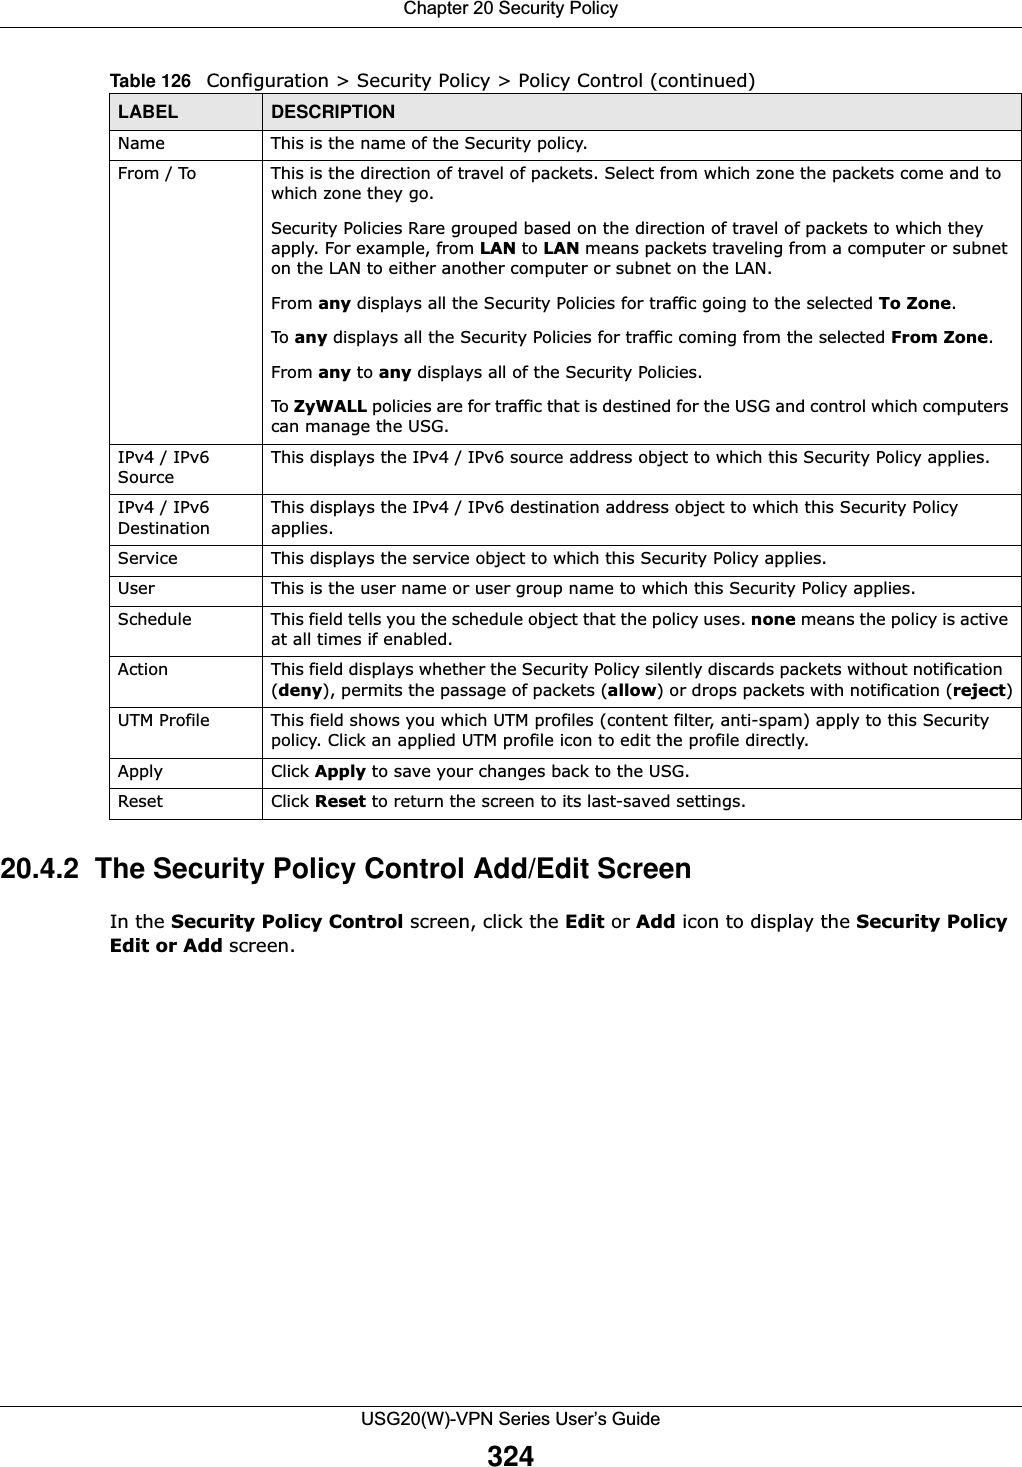 Chapter 20 Security PolicyUSG20(W)-VPN Series User’s Guide32420.4.2  The Security Policy Control Add/Edit ScreenIn the Security Policy Control screen, click the Edit or Add icon to display the Security Policy Edit or Add screen.Name This is the name of the Security policy. From / To  This is the direction of travel of packets. Select from which zone the packets come and to which zone they go.Security Policies Rare grouped based on the direction of travel of packets to which they apply. For example, from LAN to LAN means packets traveling from a computer or subnet on the LAN to either another computer or subnet on the LAN. From any displays all the Security Policies for traffic going to the selected To Zone.To any displays all the Security Policies for traffic coming from the selected From Zone.From any to any displays all of the Security Policies.To ZyWALL policies are for traffic that is destined for the USG and control which computers can manage the USG.IPv4 / IPv6 SourceThis displays the IPv4 / IPv6 source address object to which this Security Policy applies.IPv4 / IPv6 DestinationThis displays the IPv4 / IPv6 destination address object to which this Security Policy applies.Service This displays the service object to which this Security Policy applies.User This is the user name or user group name to which this Security Policy applies.Schedule This field tells you the schedule object that the policy uses. none means the policy is active at all times if enabled.Action This field displays whether the Security Policy silently discards packets without notification  (deny), permits the passage of packets (allow) or drops packets with notification (reject)UTM Profile This field shows you which UTM profiles (content filter, anti-spam) apply to this Security policy. Click an applied UTM profile icon to edit the profile directly.Apply Click Apply to save your changes back to the USG.Reset Click Reset to return the screen to its last-saved settings. Table 126   Configuration &gt; Security Policy &gt; Policy Control (continued)LABEL DESCRIPTION